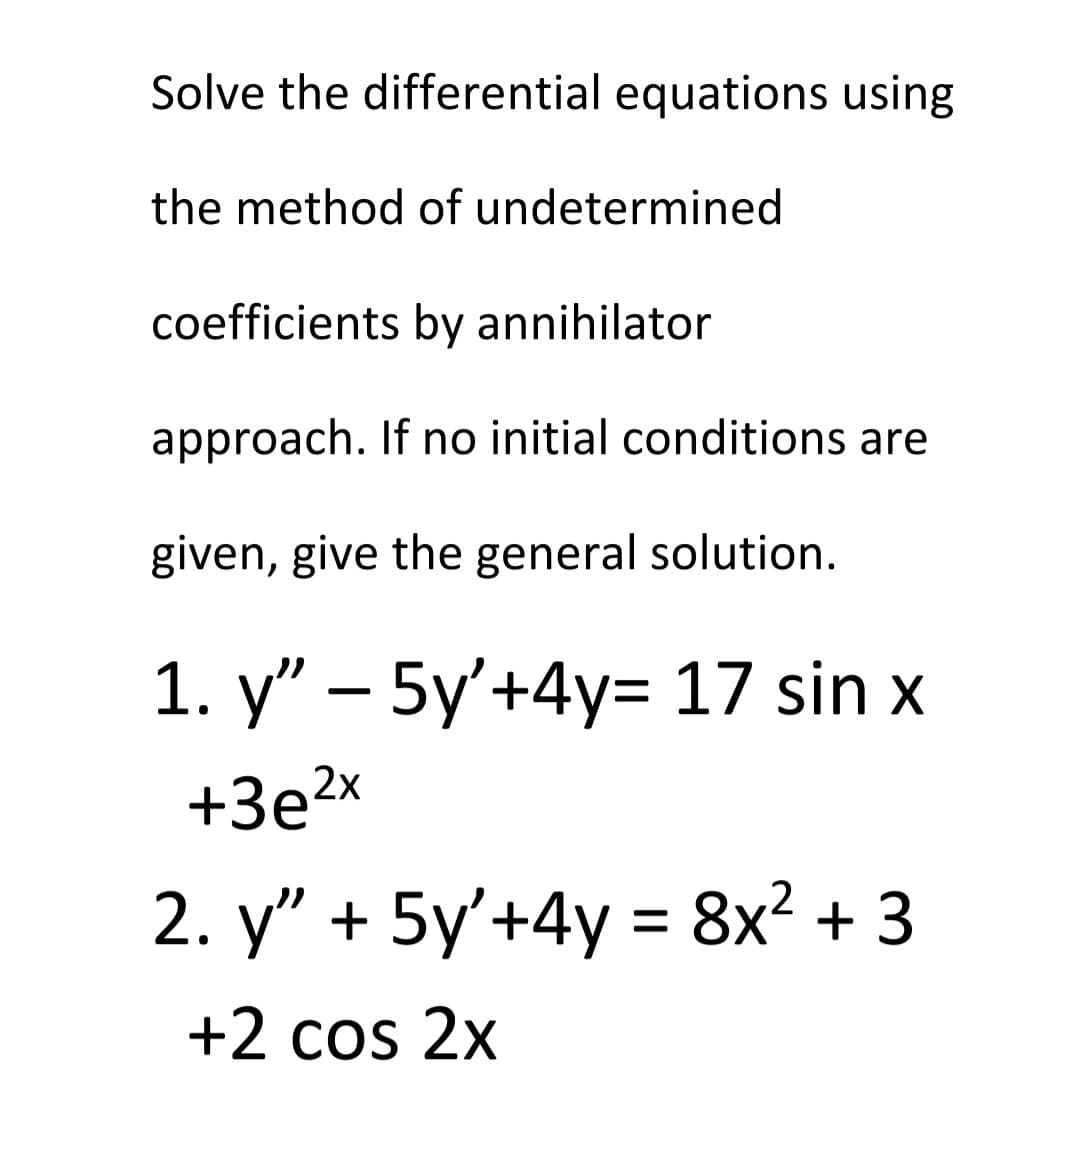 Solve the differential equations using
the method of undetermined
coefficients by annihilator
approach. If no initial conditions are
given, give the general solution.
1. y" – 5y'+4y= 17 sin x
+3е2x
2. y" + 5y'+4y = 8x² + 3
+2 cos 2x
